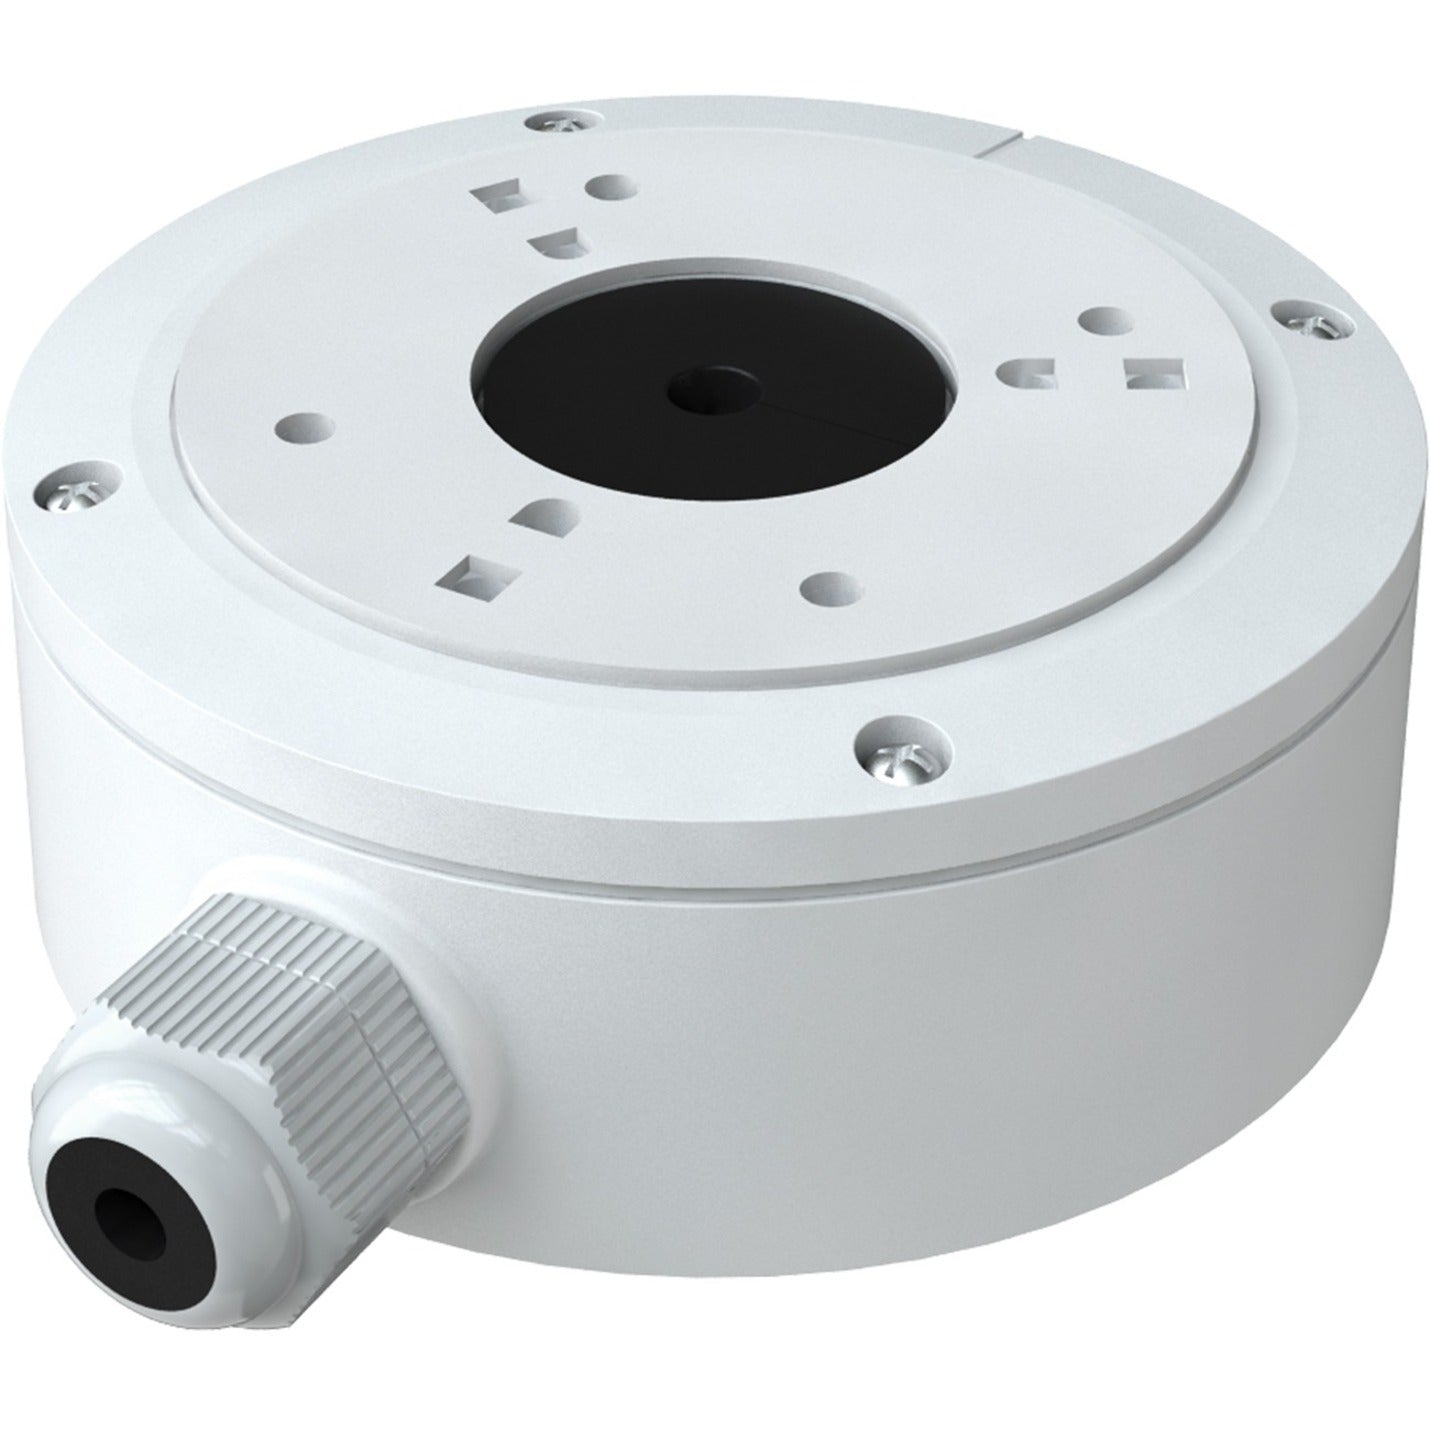 Speco JB2 Alternate Junction Box Mounting Box for Security Camera, White